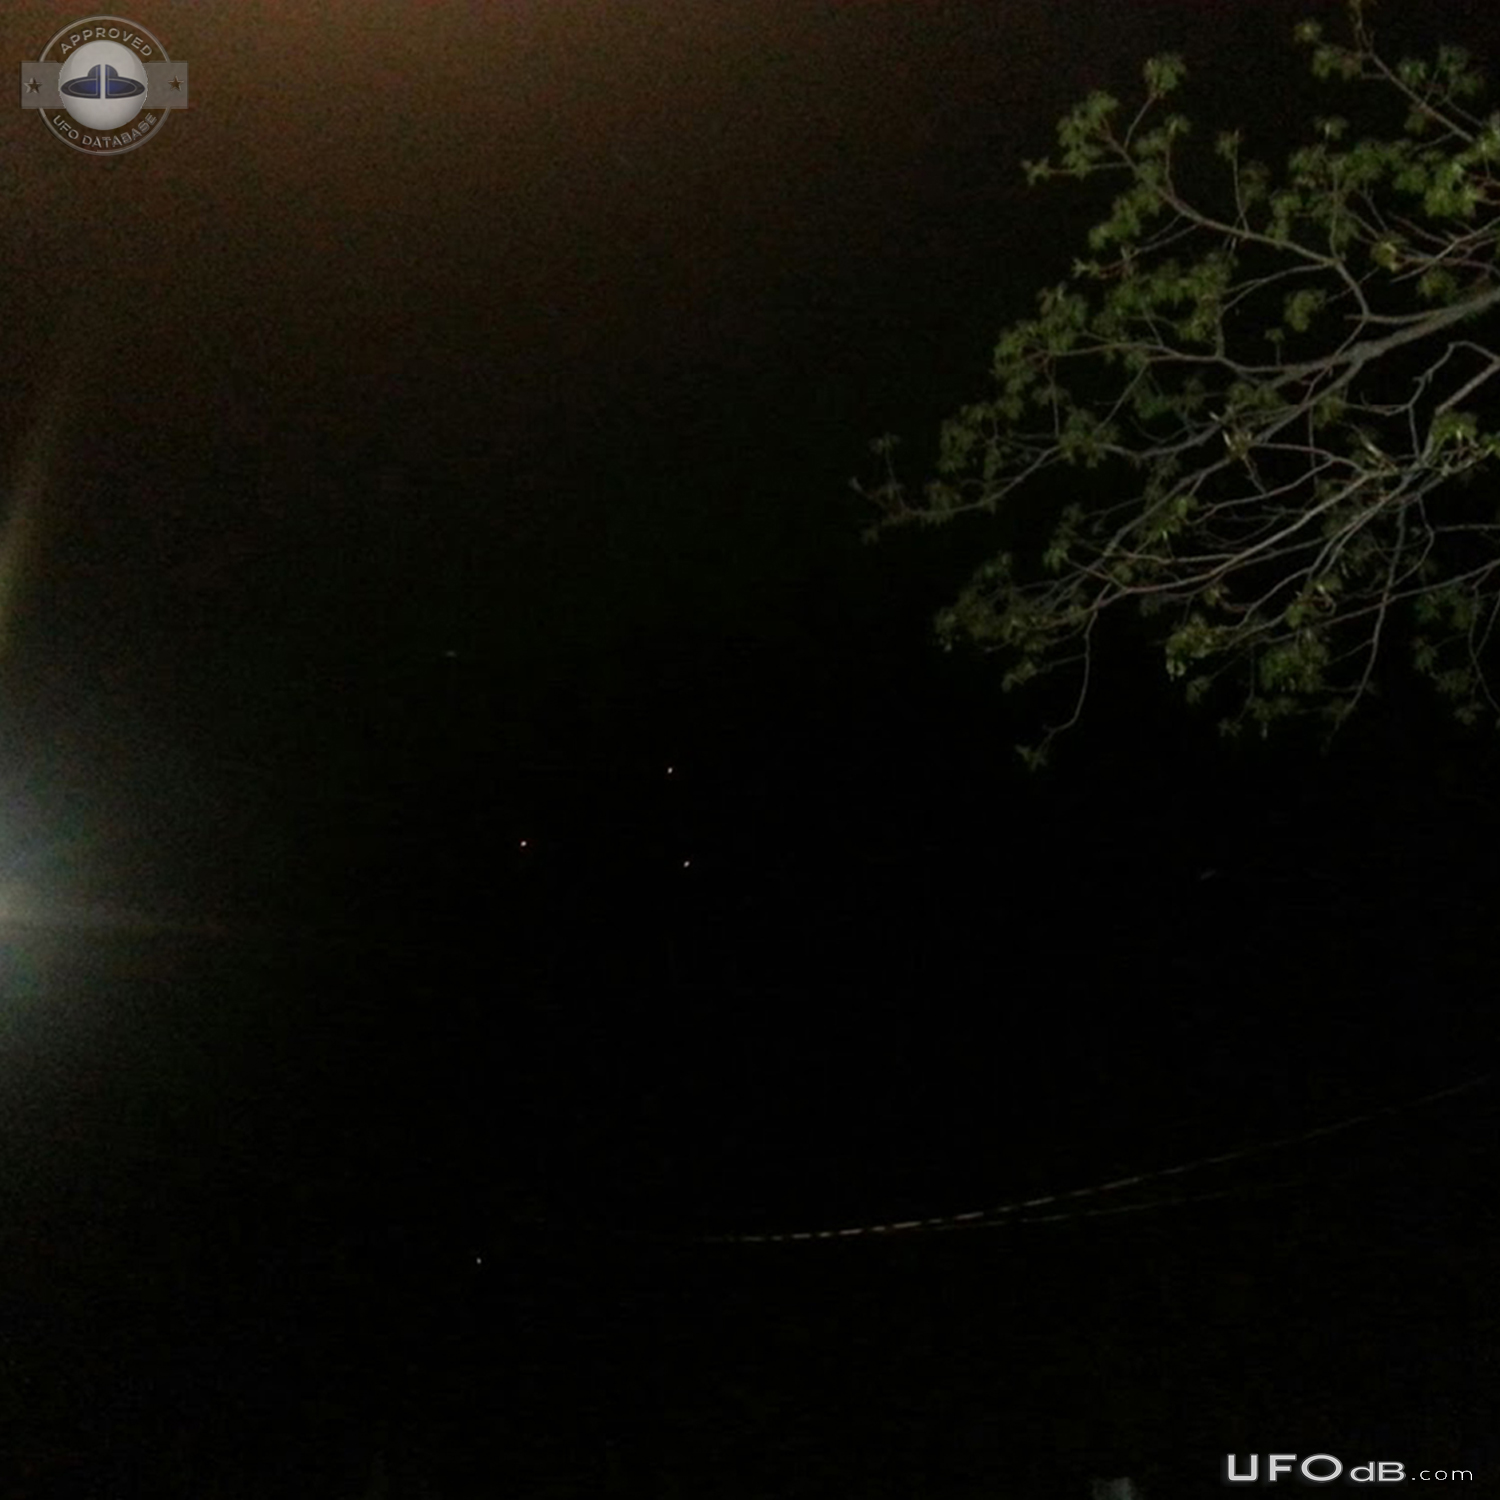 UFO Lights in triangle formation on picture - North Bay Ontario - 2015 UFO Picture #694-2